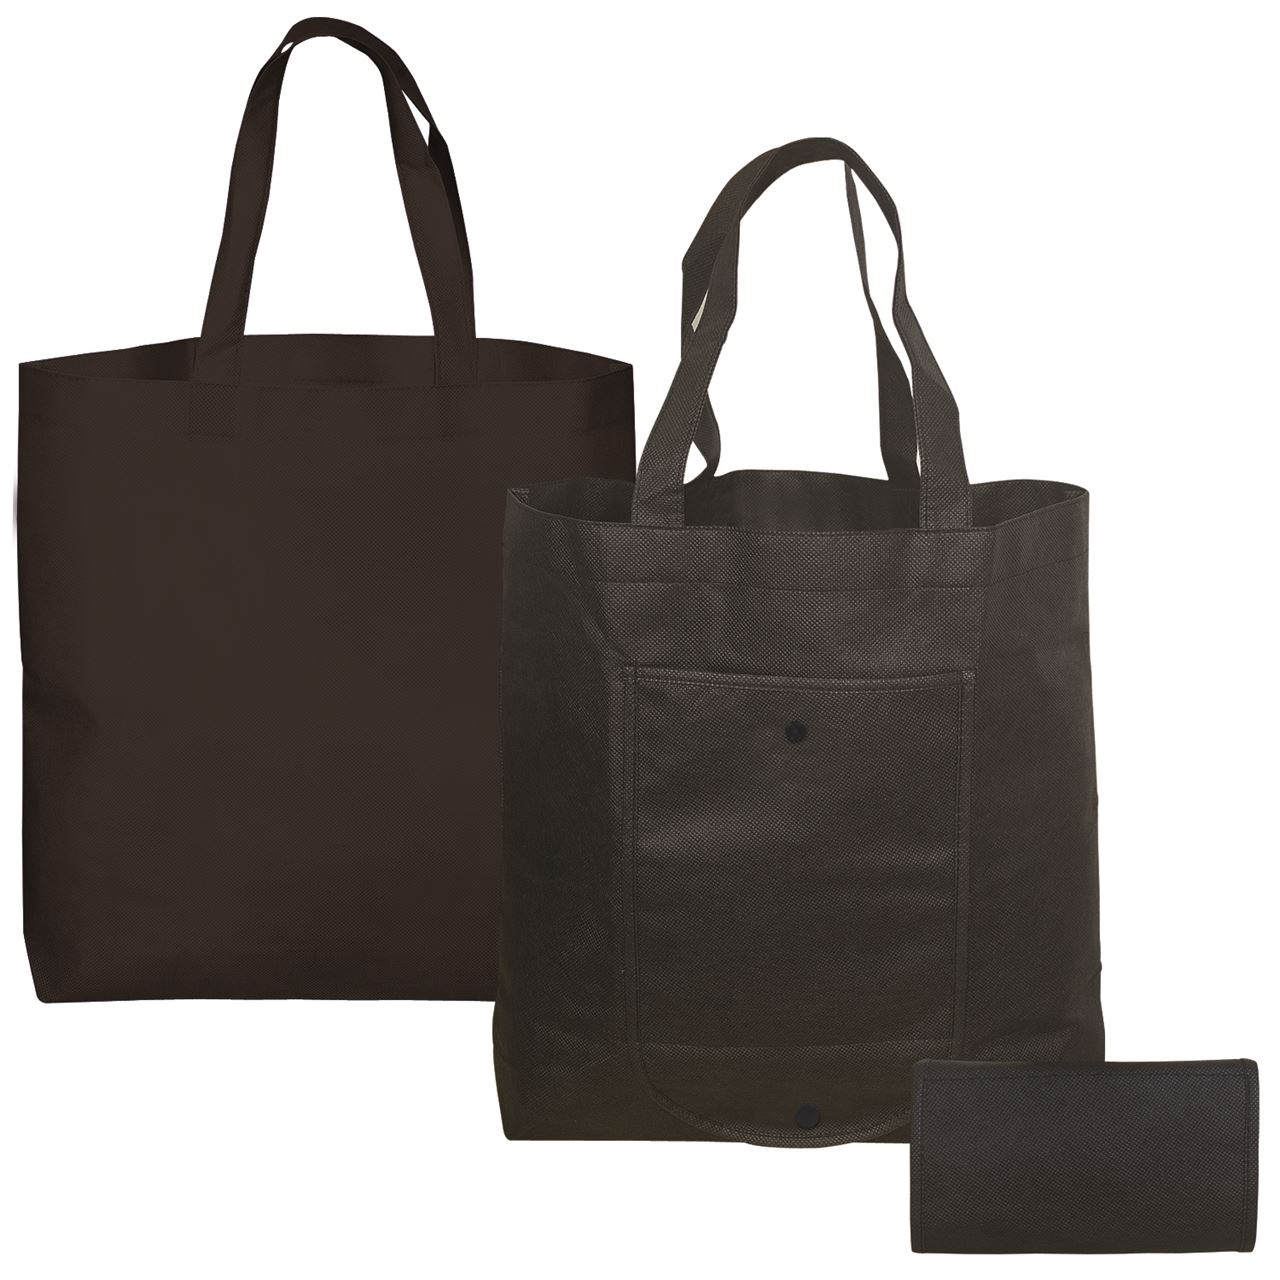 Picture of Folding Non Woven Tote (16” W x 14” H x 3.5” D)